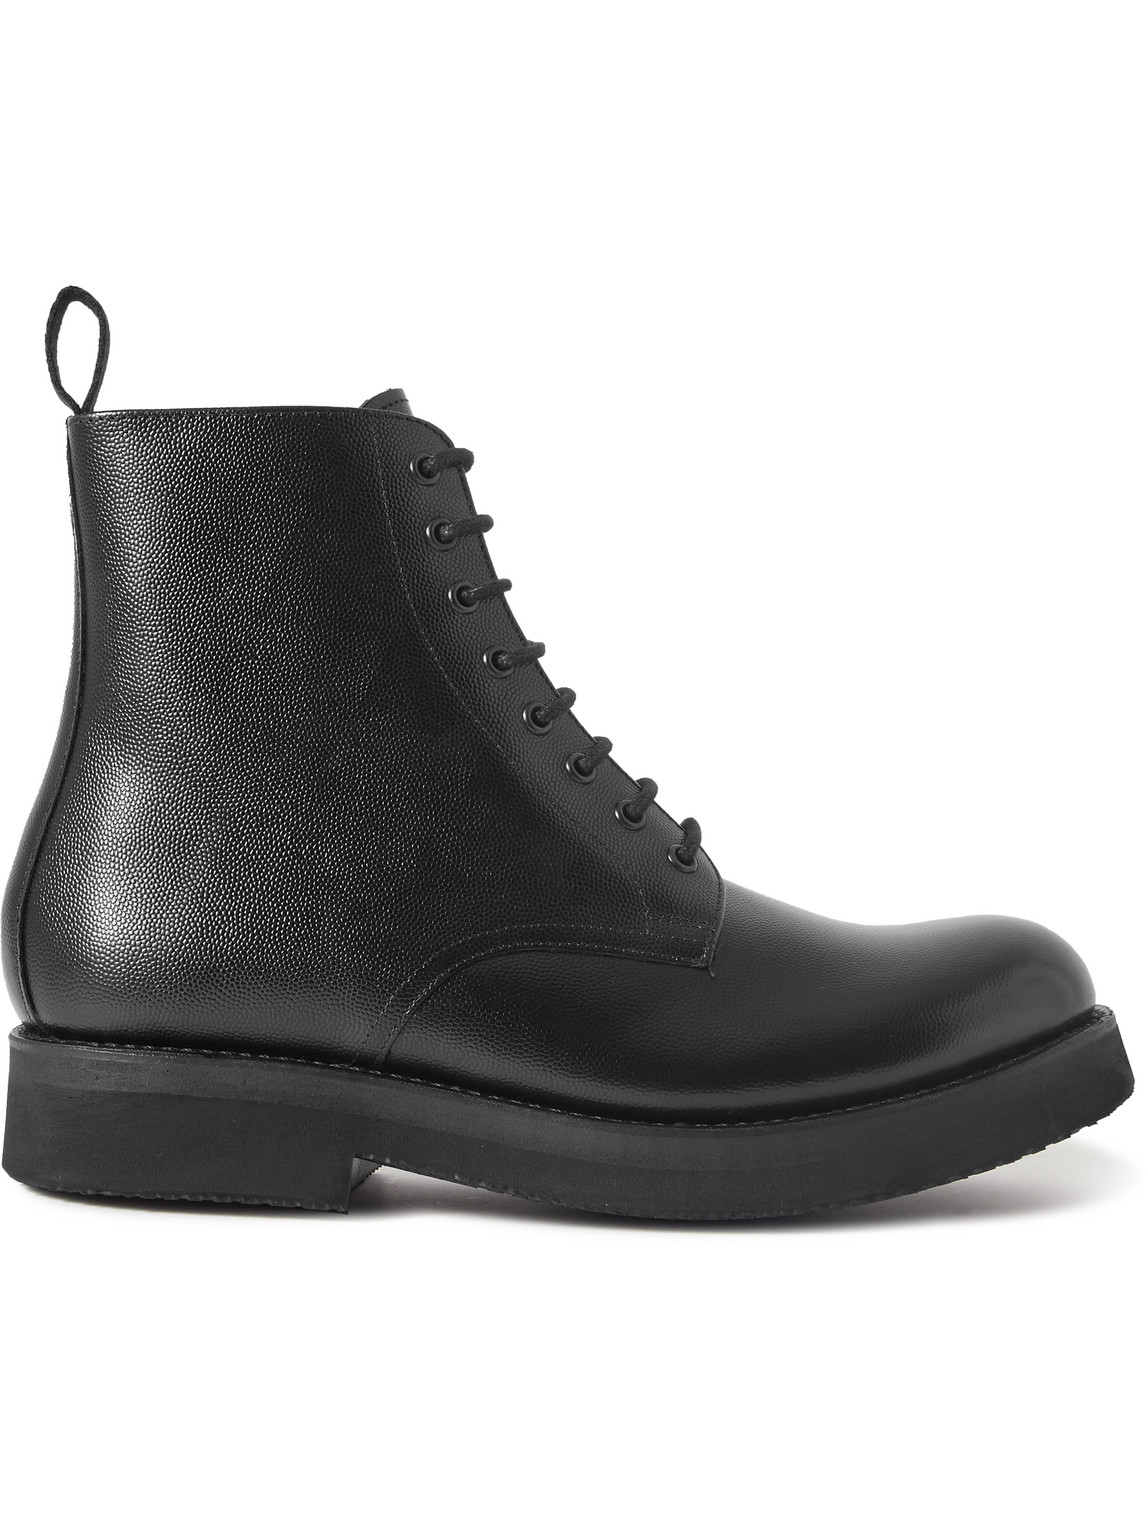 Grenson Dudley Pebble-grain Leather Boots In Black